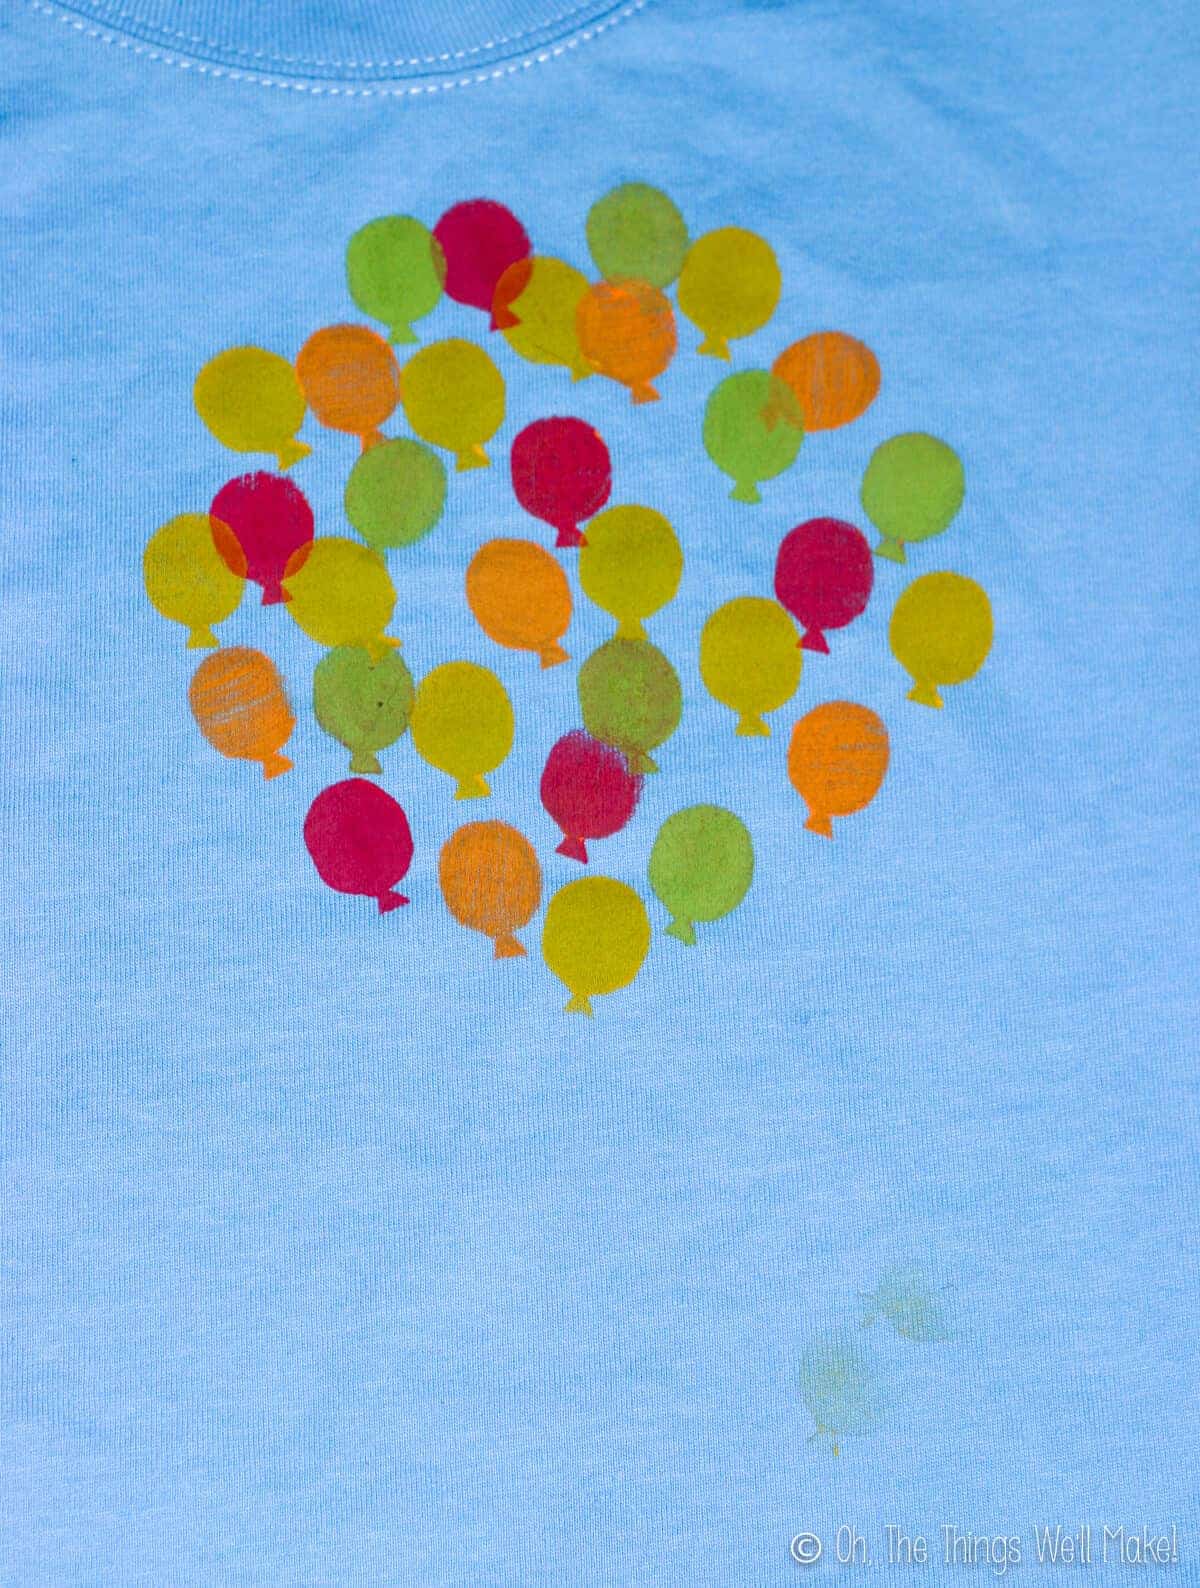 Top view of blue shirt with more balloons of different colors stamped on it.